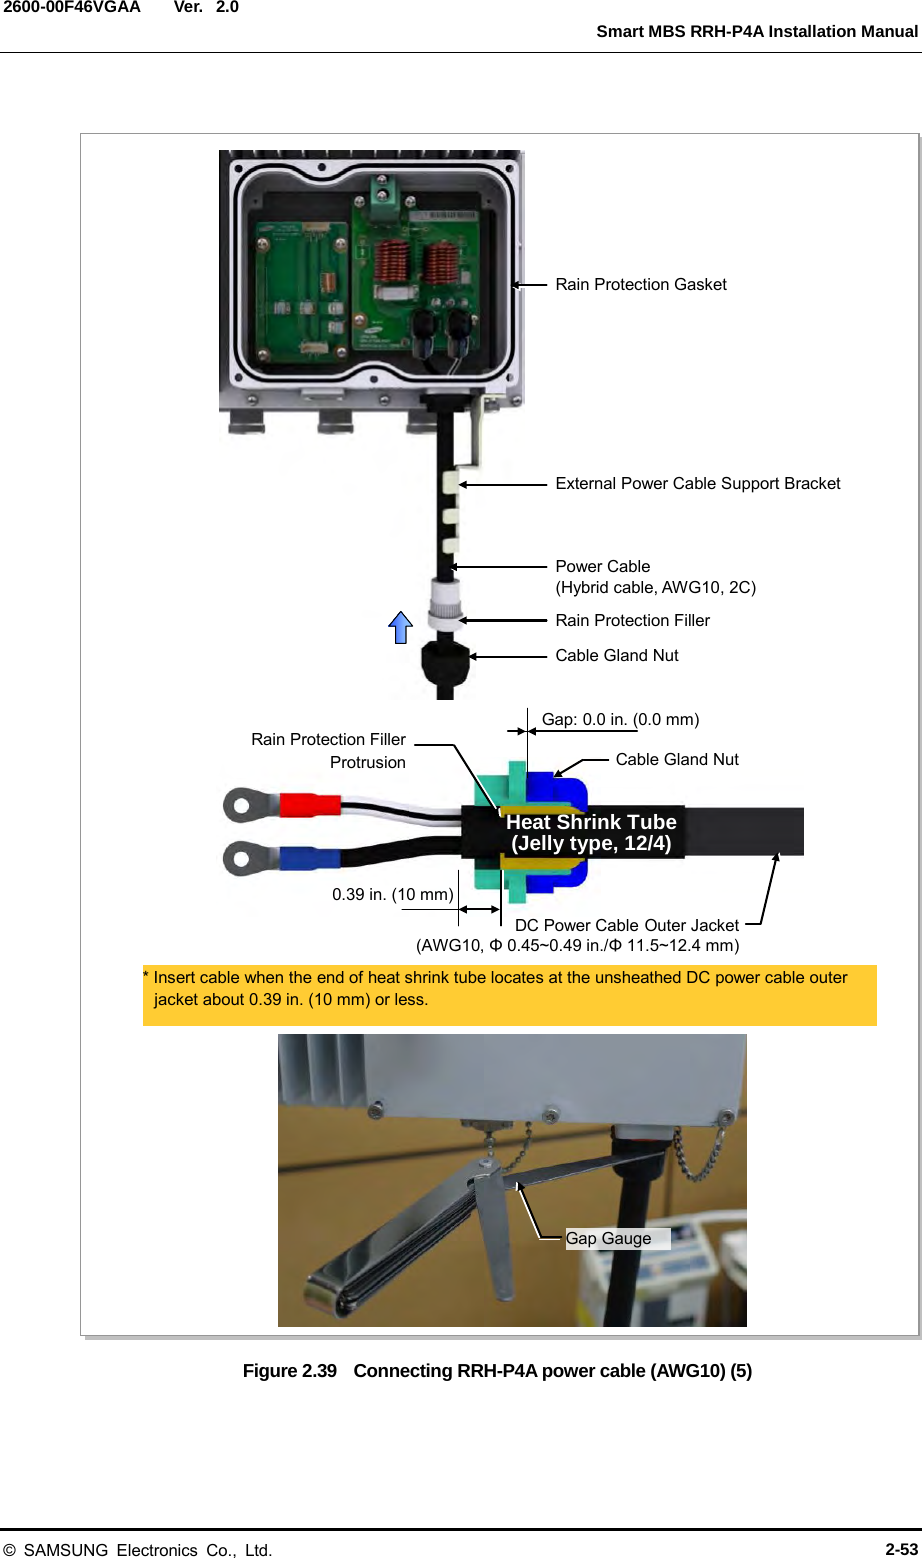  Ver.   Smart MBS RRH-P4A Installation Manual 2600-00F46VGAA 2.0  Figure 2.39  Connecting RRH-P4A power cable (AWG10) (5) Gap Gauge Power Cable (Hybrid cable, AWG10, 2C) Rain Protection Filler Cable Gland Nut External Power Cable Support Bracket * Insert cable when the end of heat shrink tube locates at the unsheathed DC power cable outer jacket about 0.39 in. (10 mm) or less. Heat Shrink Tube (Jelly type, 12/4) Rain Protection Filler Protrusion  Cable Gland Nut Gap: 0.0 in. (0.0 mm) DC Power Cable Outer Jacket (AWG10, Φ 0.45~0.49 in./Φ 11.5~12.4 mm) 0.39 in. (10 mm) Rain Protection Gasket © SAMSUNG Electronics Co., Ltd. 2-53 